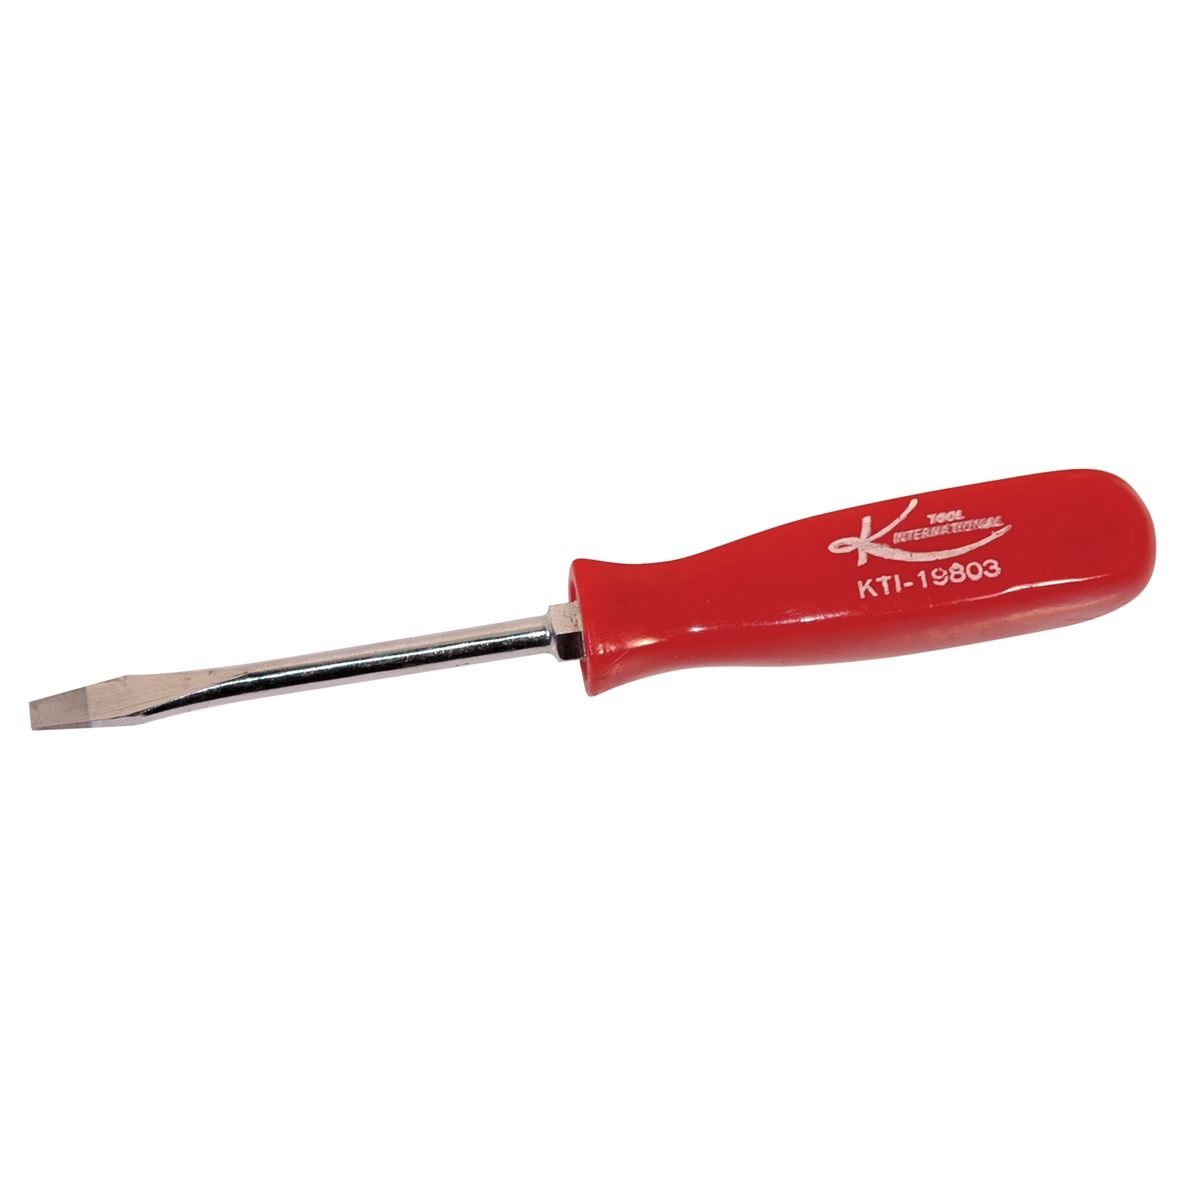 Slotted Screwdriver - 3 In - Red Handle